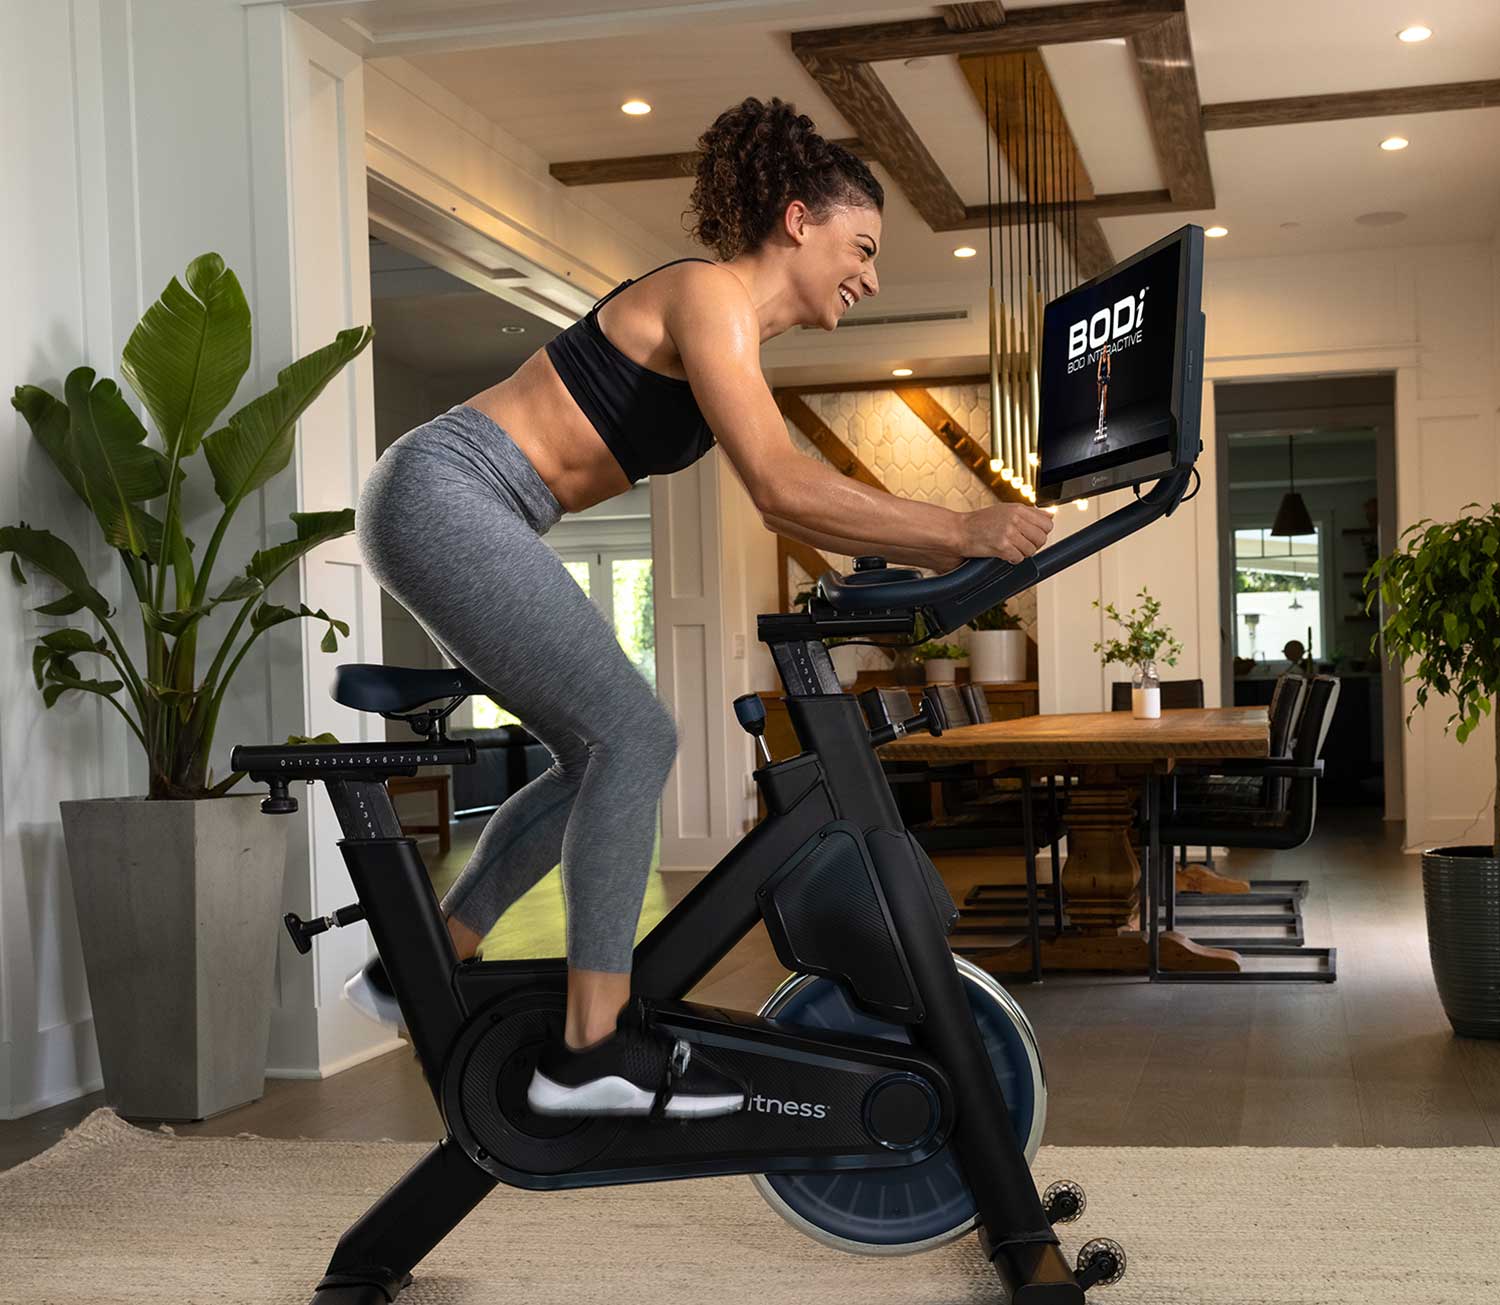 MYXfitness | The Indoor Exercise Bike that's Redefining Home Fitness